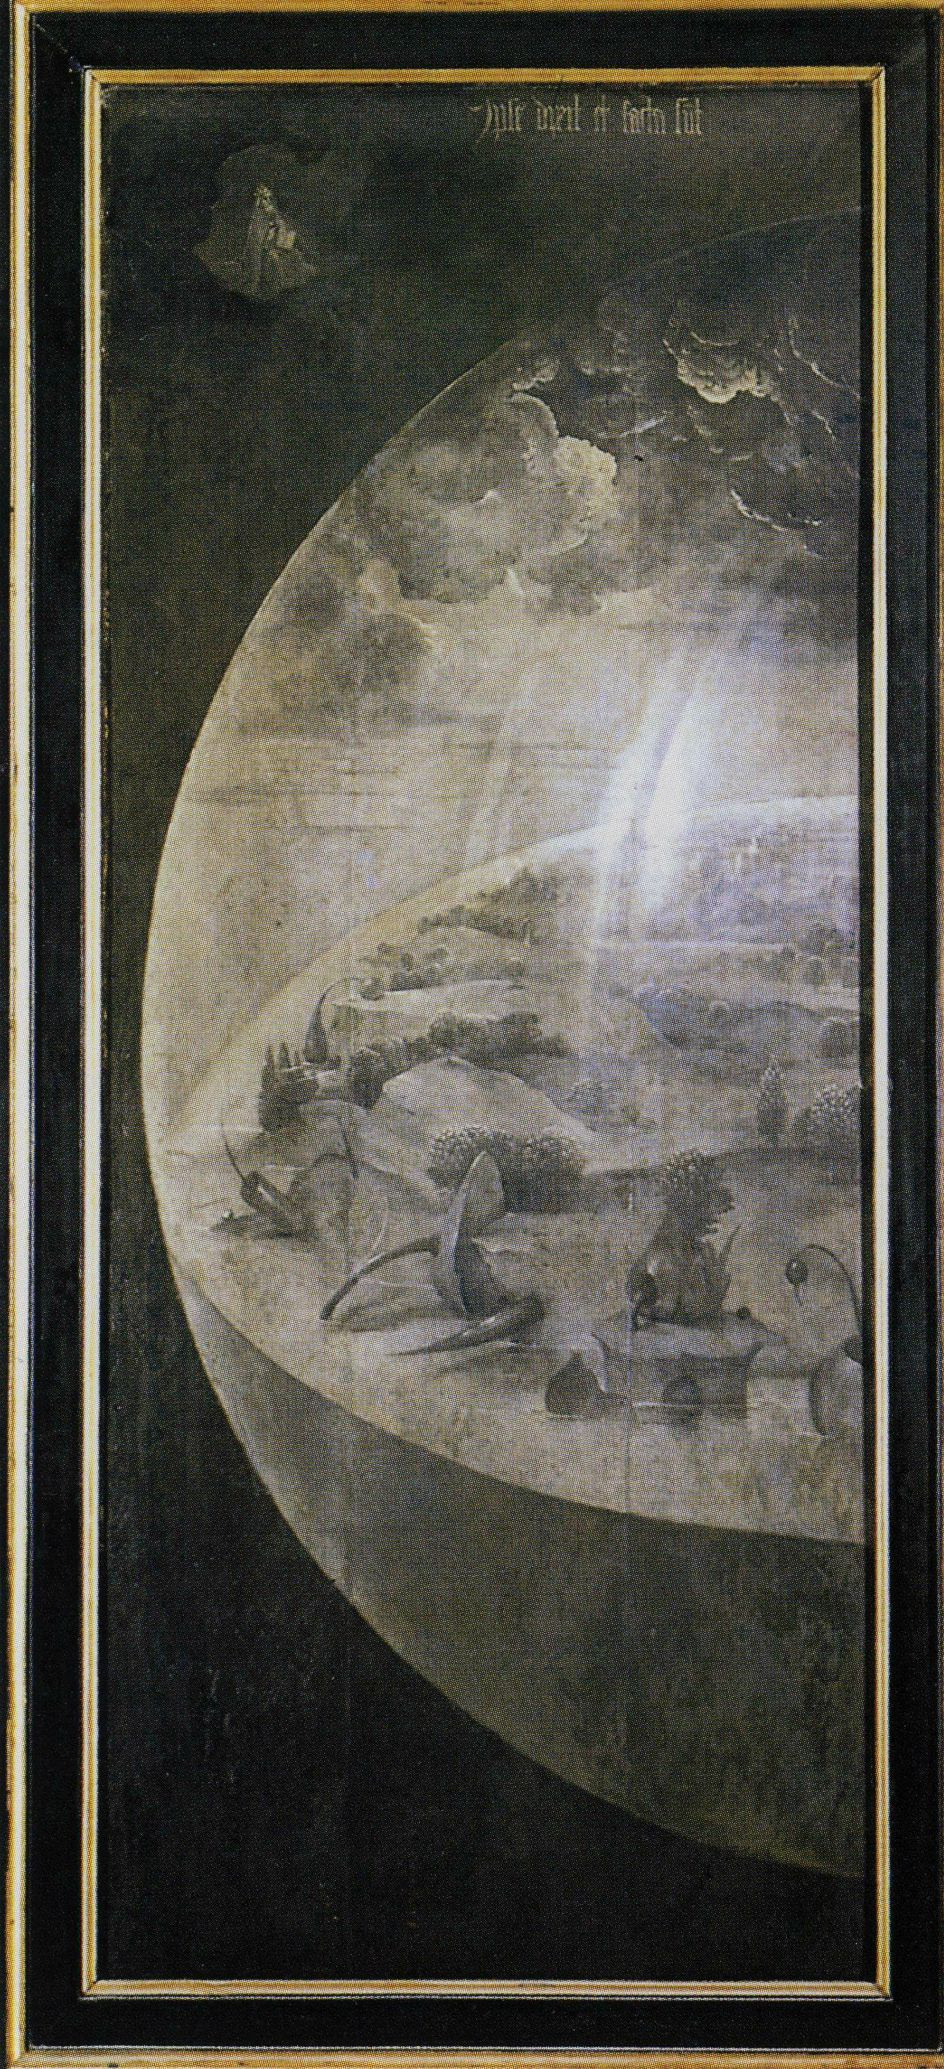 Hieronymus Bosch. The garden of earthly delights. The Creation Of The World. The outer left wing